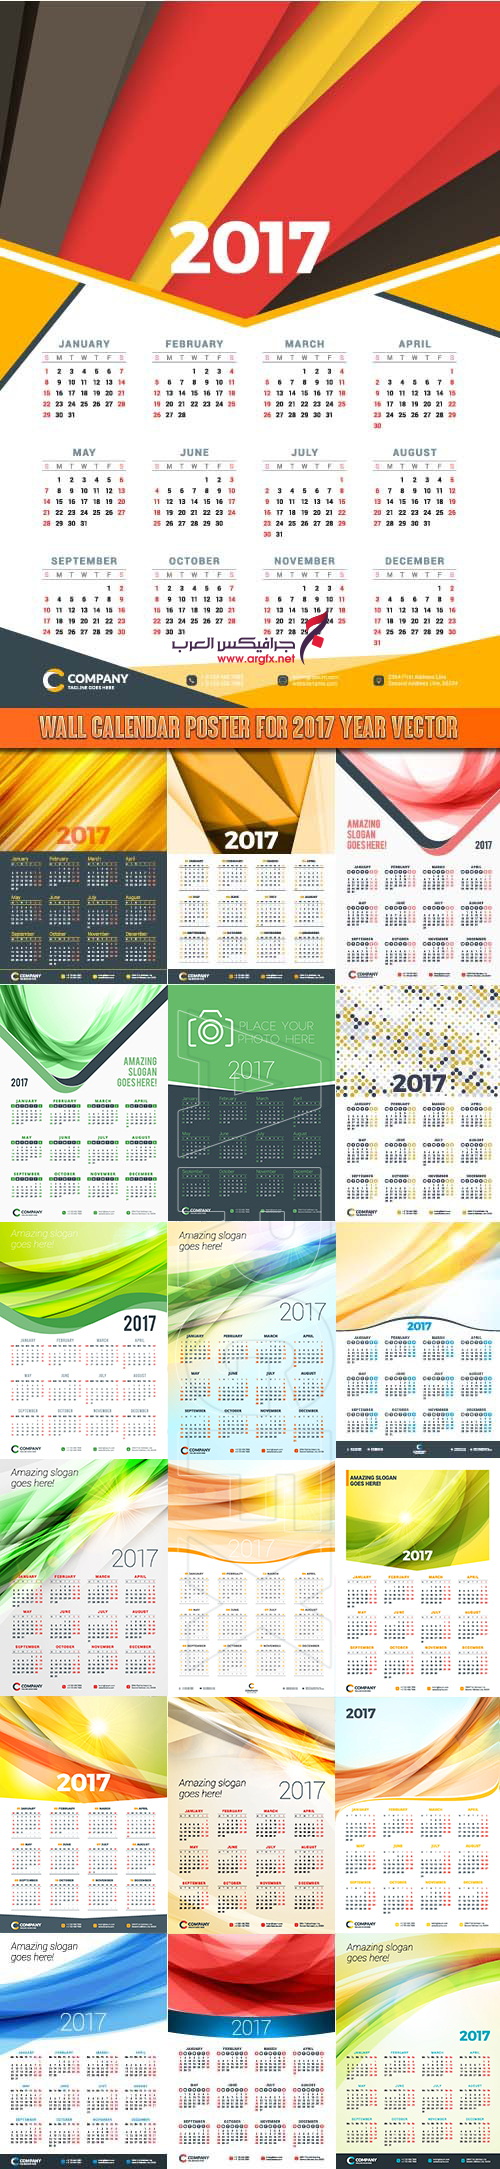 Wall Calendar Poster for 2017 Year vector